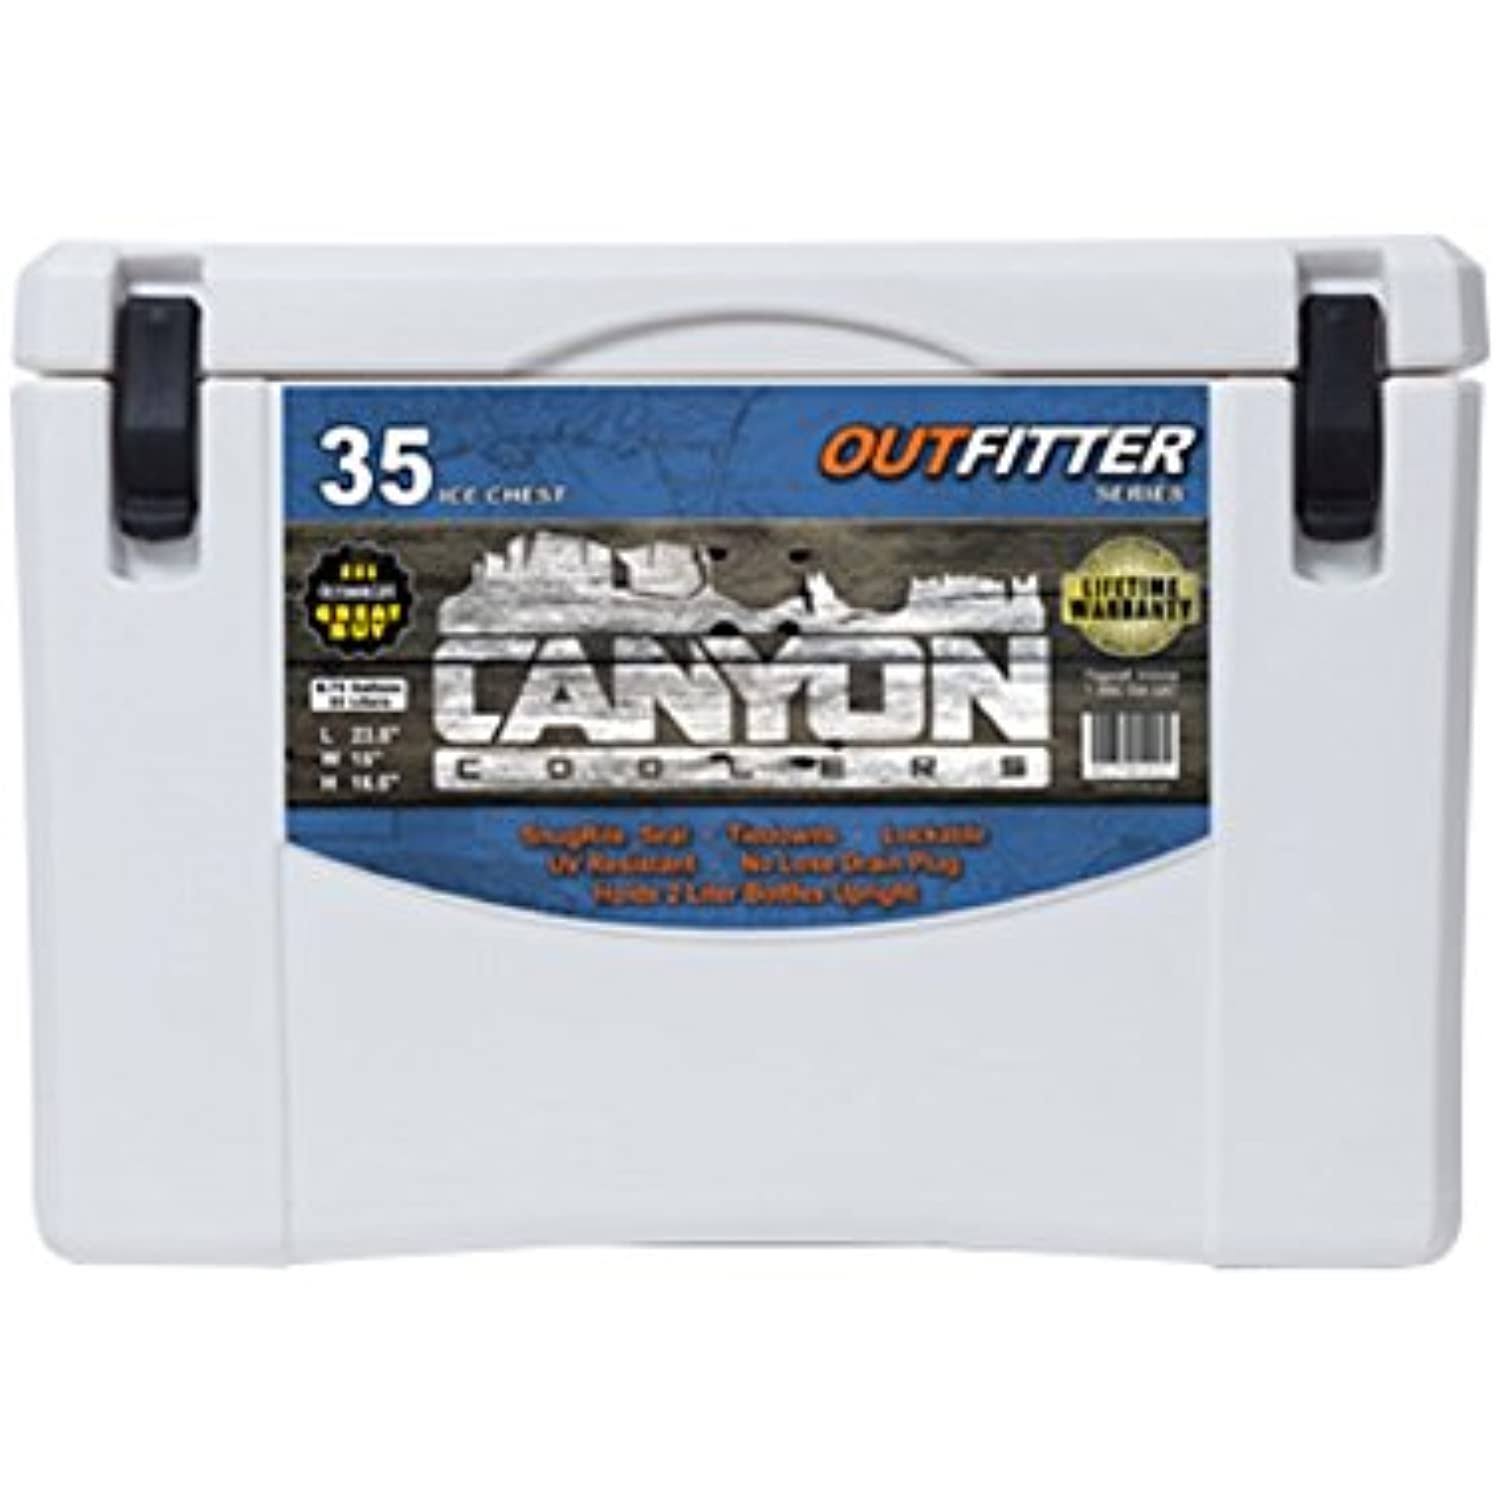 Canyon Coolers Outfitter Series Cooler - 35qt, White Marble